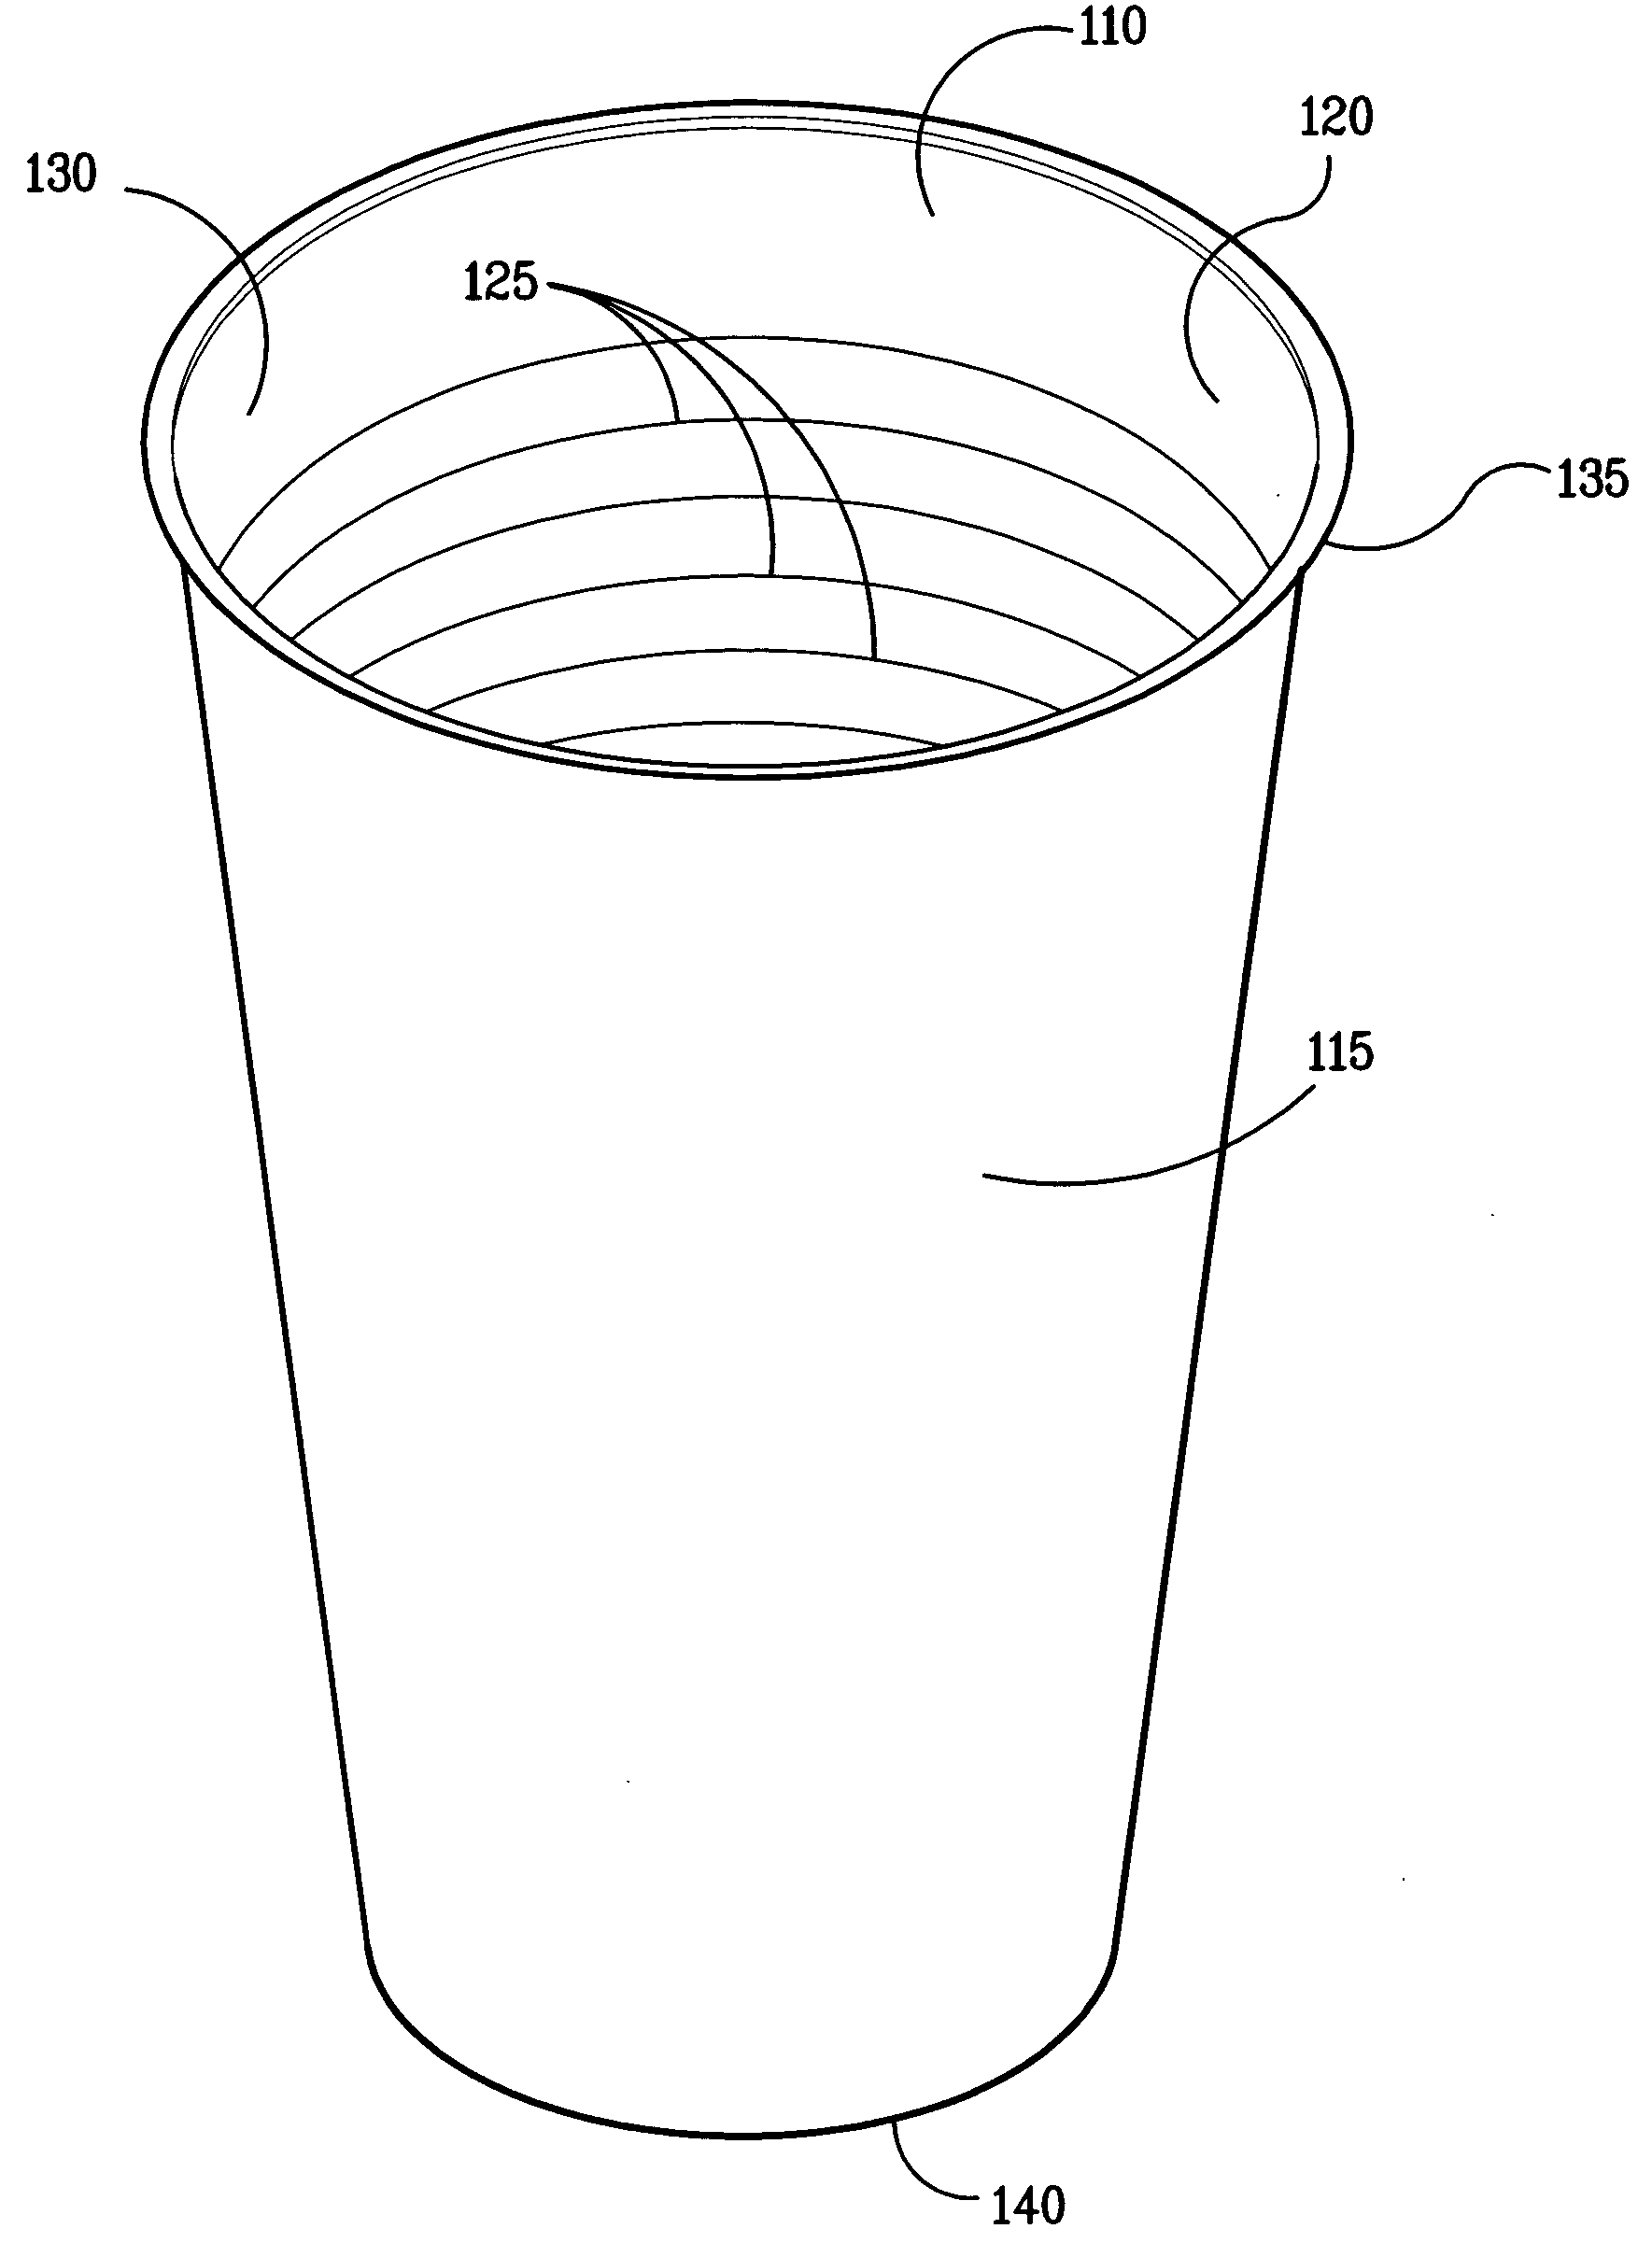 Paper-wrapped polymer beverage container